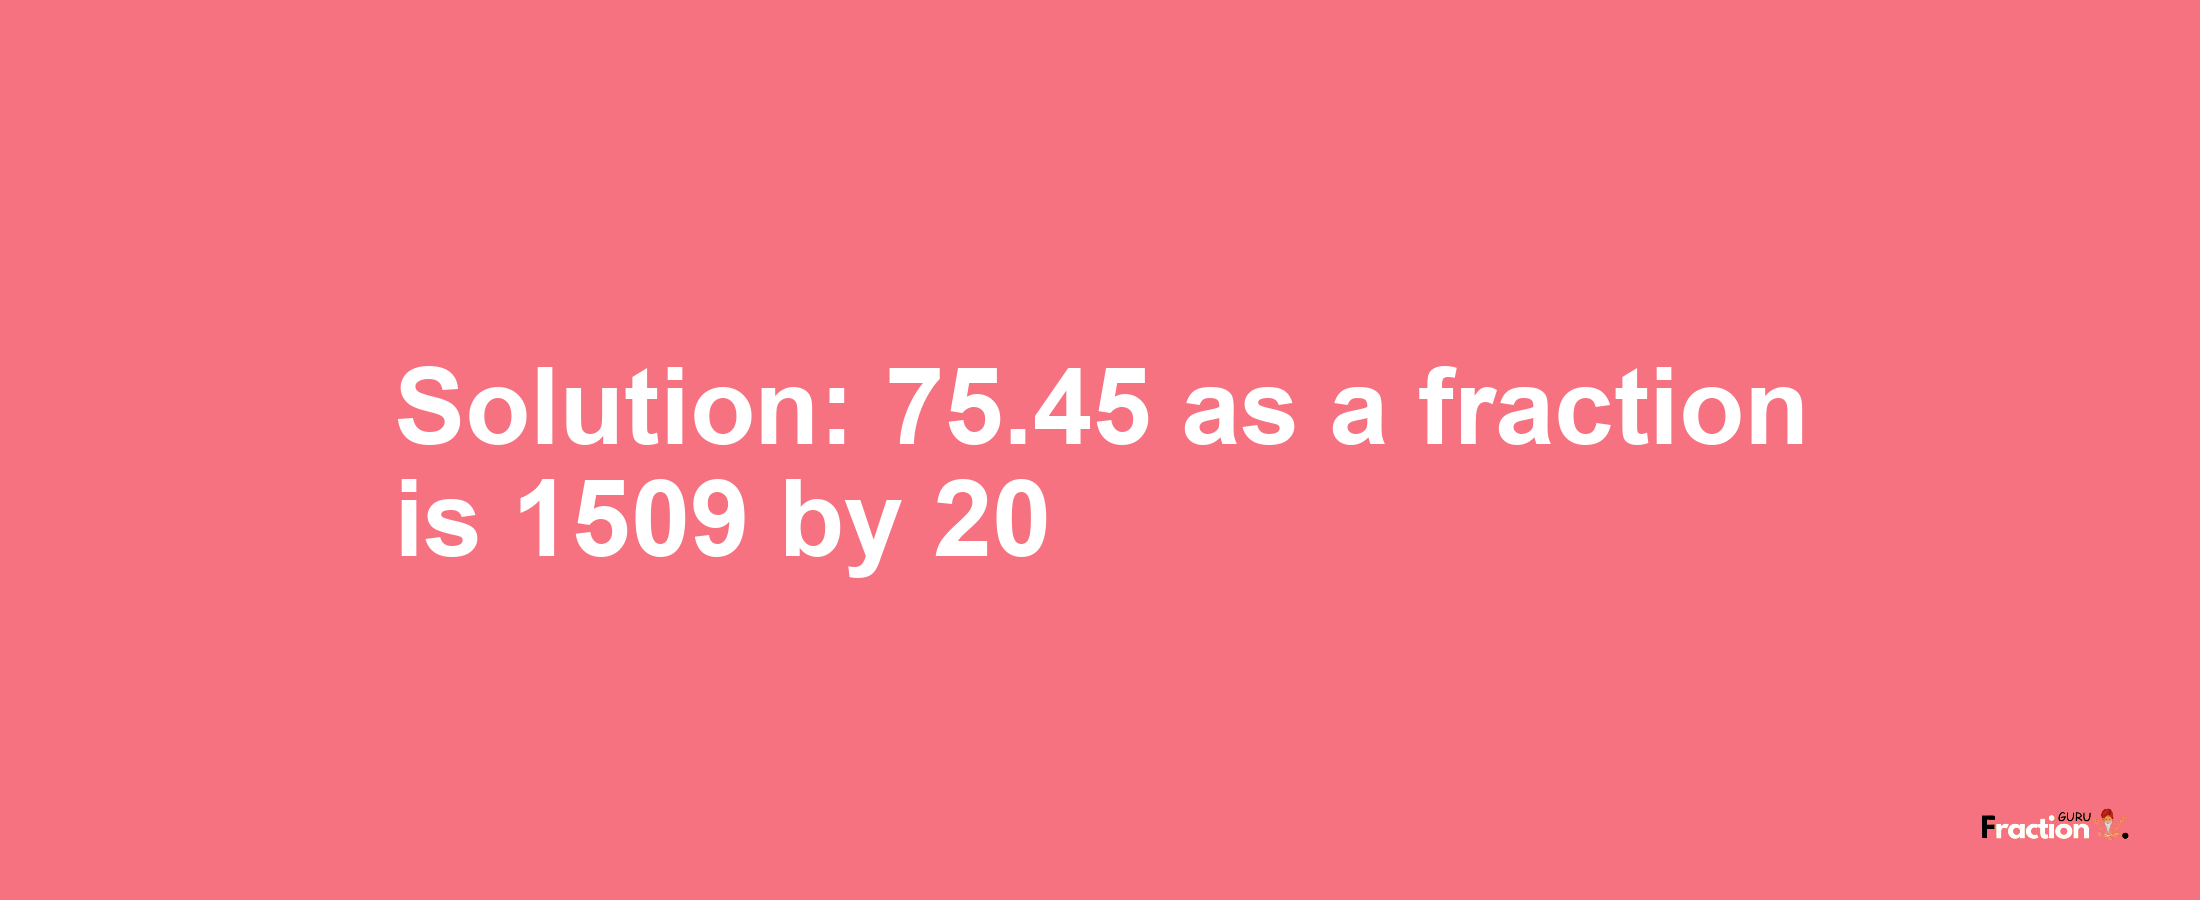 Solution:75.45 as a fraction is 1509/20